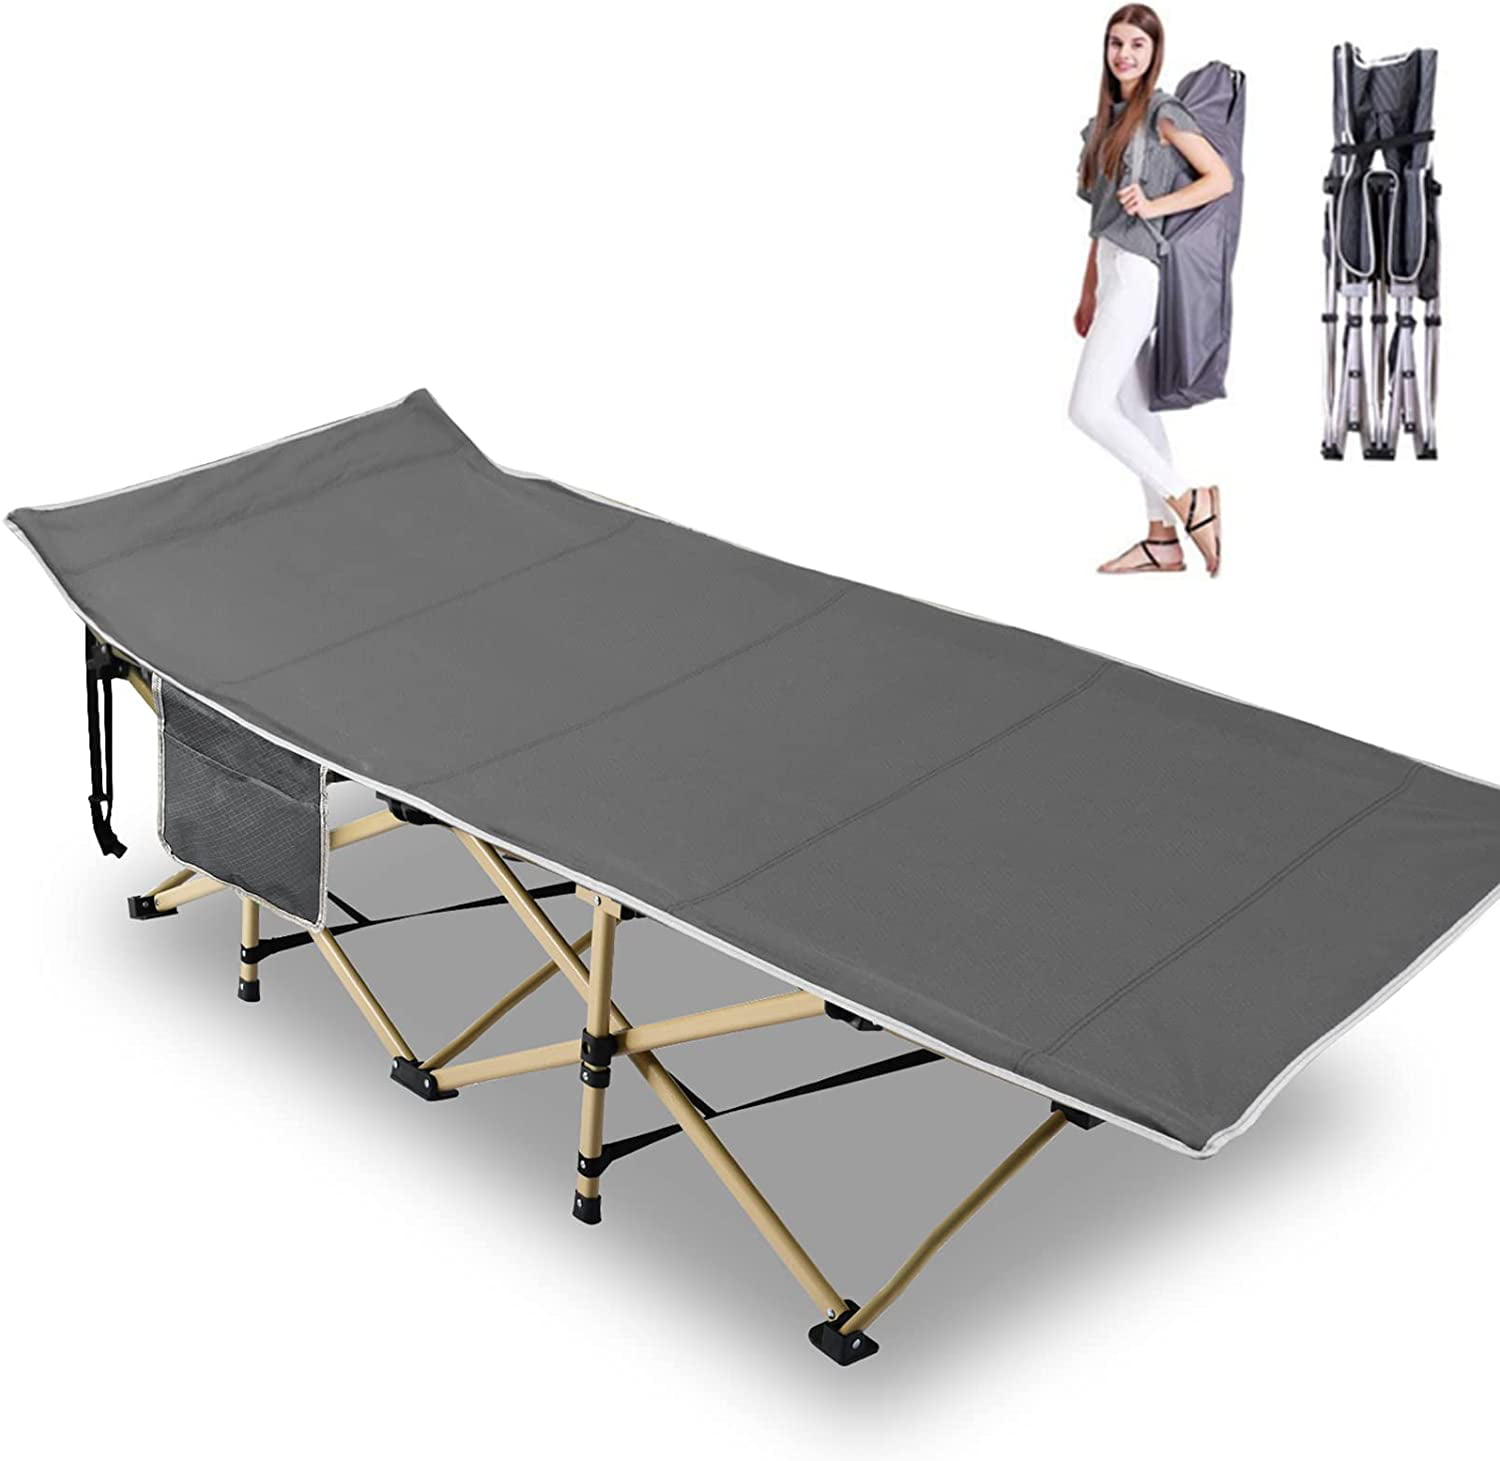 Coleman® ComfortSmart™ Camping Cot with Sleeping Pad 